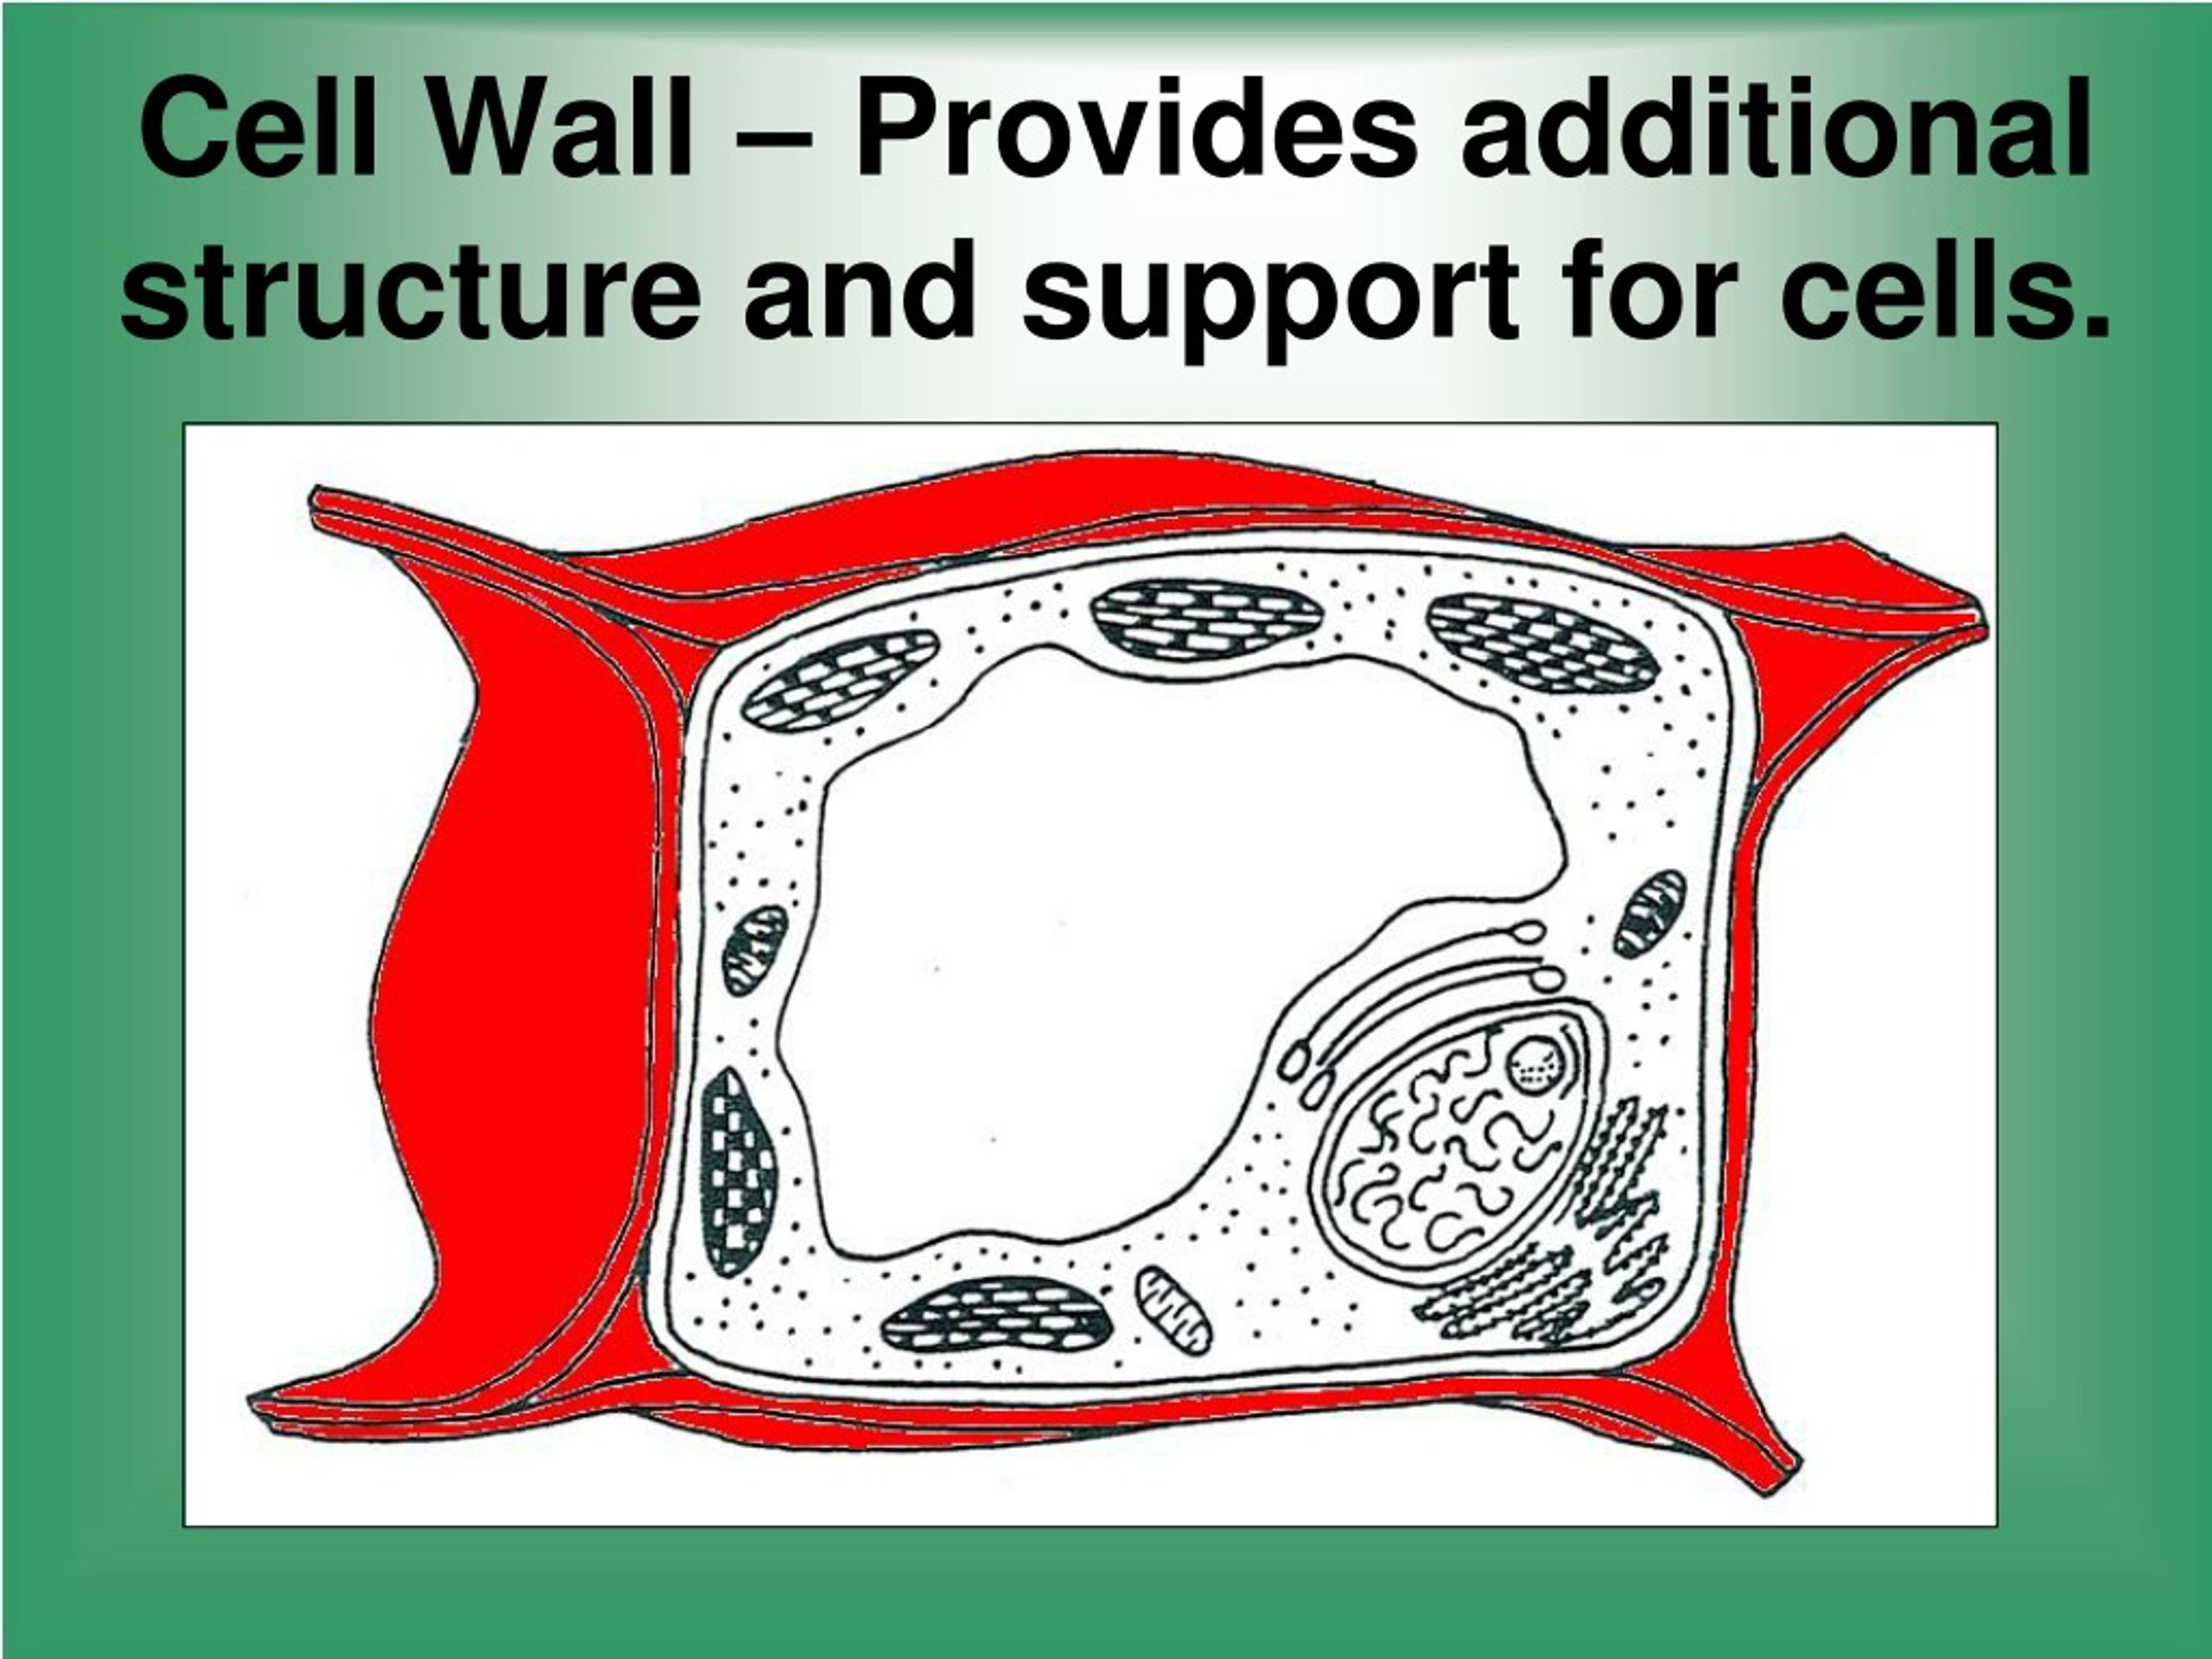 Cells wall